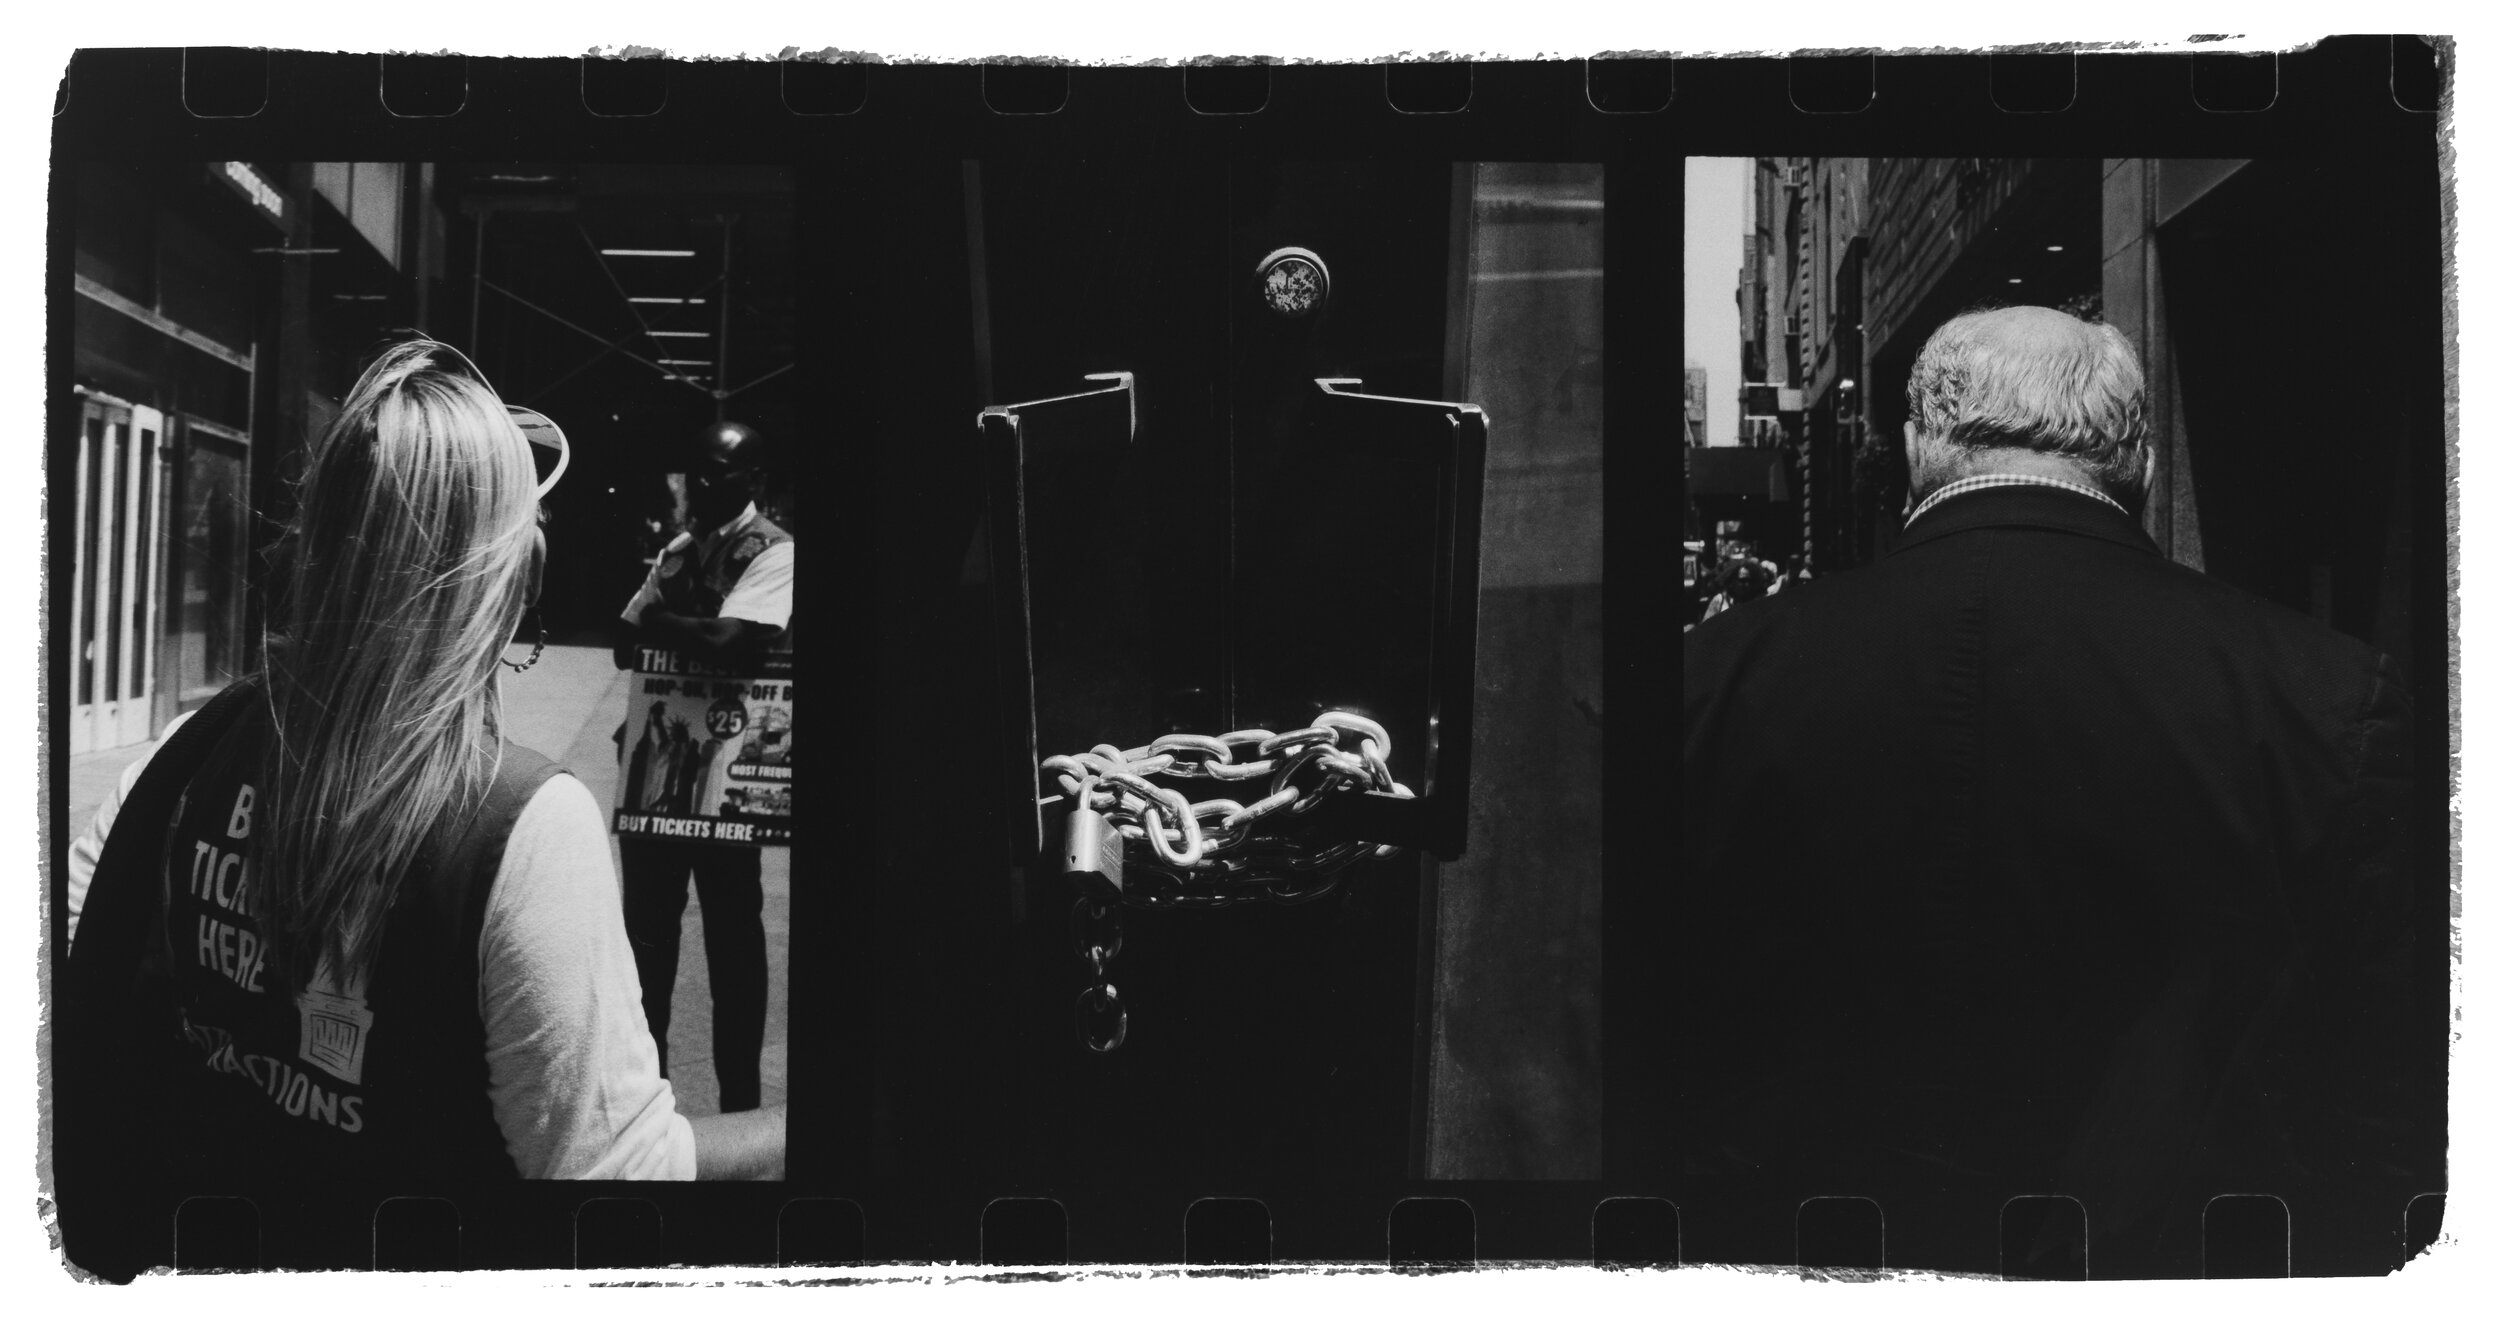  Nolan Warner - Sullivan   Untitled (Triptych #2) , 2020  From the series: … And Now We Are Walking Down The Street  Silver Gelatin Print  